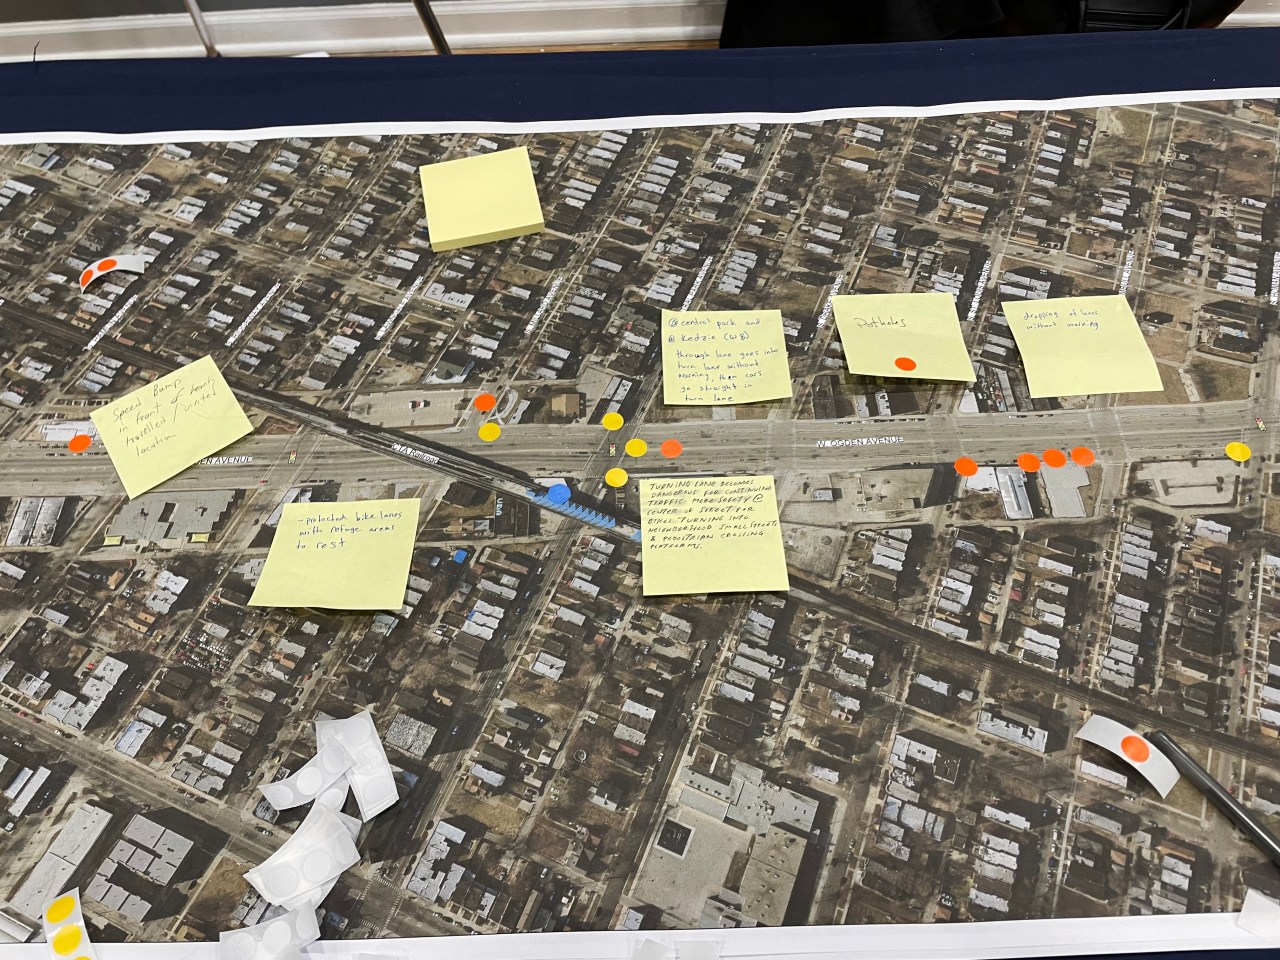 Map of Ogden with Post-It notes comments. Photo: Cameron Bolton